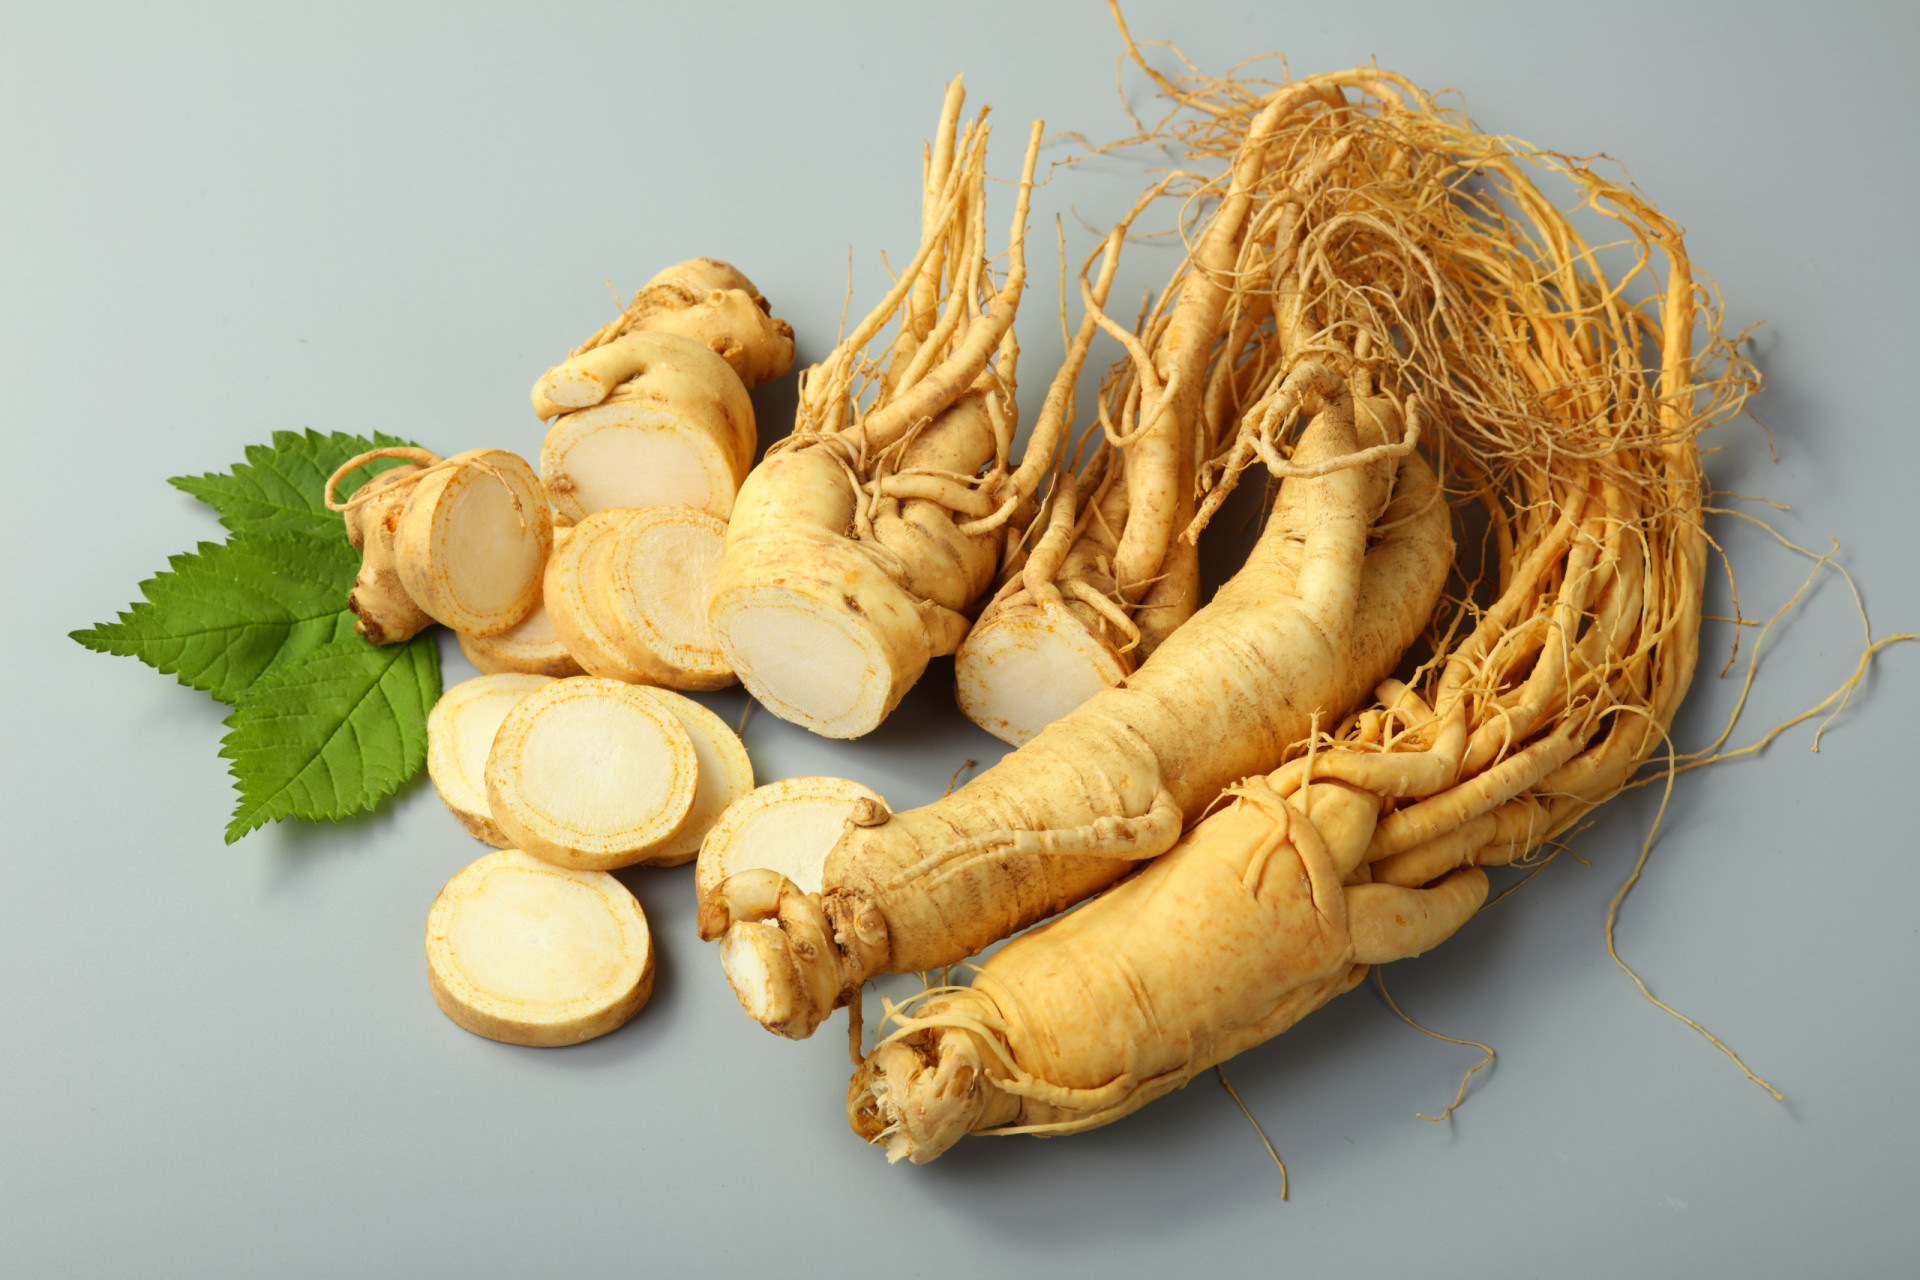 <p>Ginseng may also cause side effects such as headaches, sleeplessness, and tremors when taken with MAO inhibitors. Ginseng may also interact with hypoglycemic drugs, including insulin, and potentiate hypoglycemic activity of these drugs.</p><p><a href="https://www.msn.com/en-us/community/channel/vid-7xx8mnucu55yw63we9va2gwr7uihbxwc68fxqp25x6tg4ftibpra?cvid=94631541bc0f4f89bfd59158d696ad7e">Follow us and access great exclusive content every day</a></p>